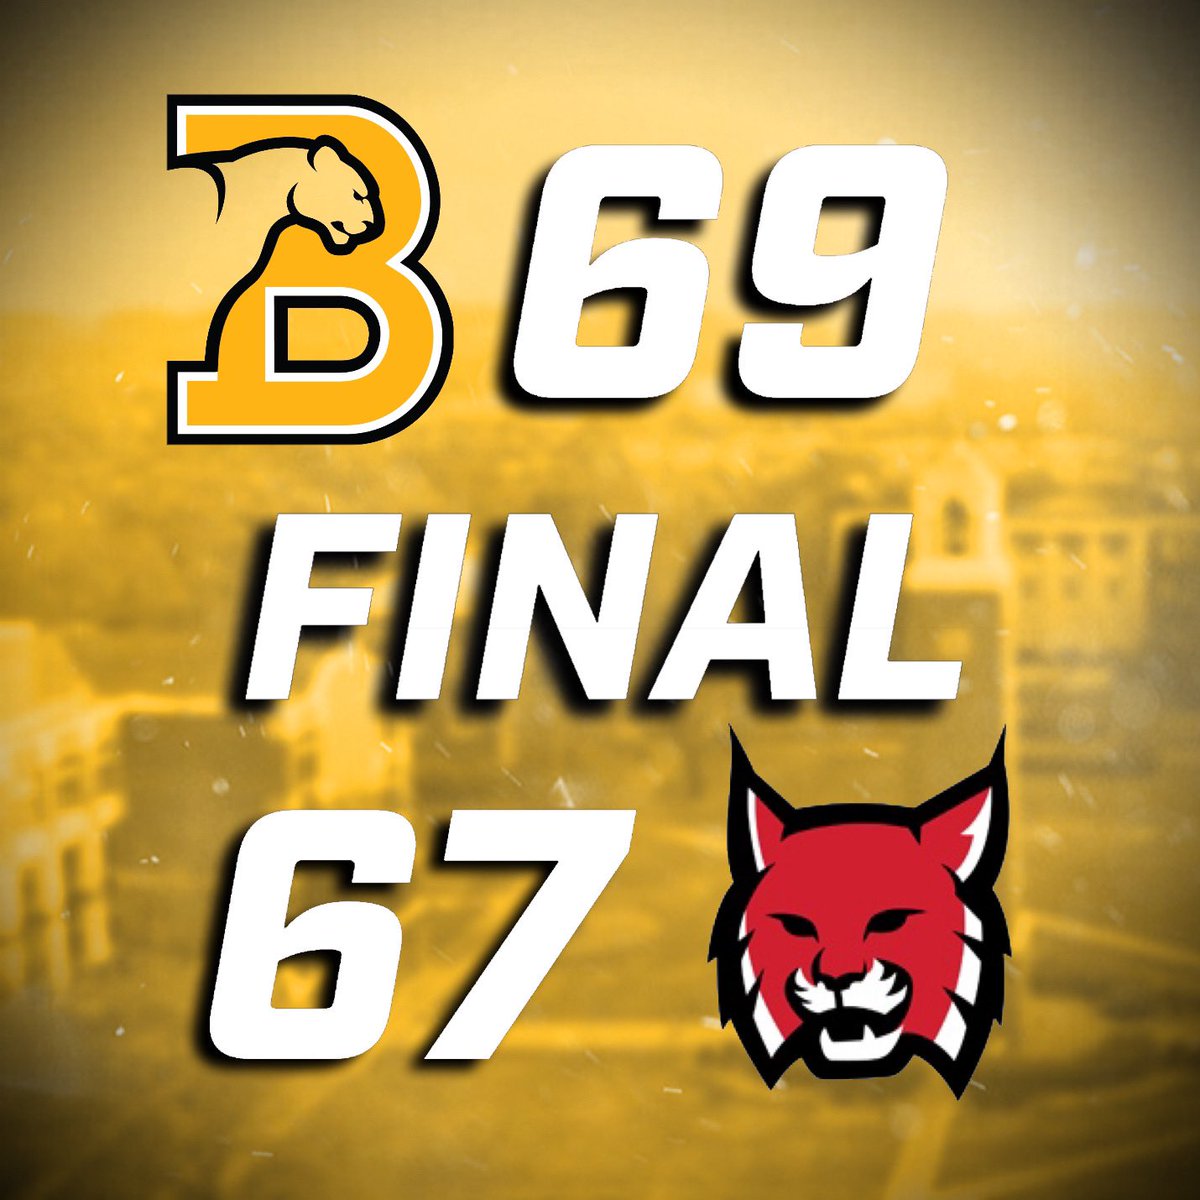 Finished the regular season off strong with a win at Bill Battle! #yeahpanthers